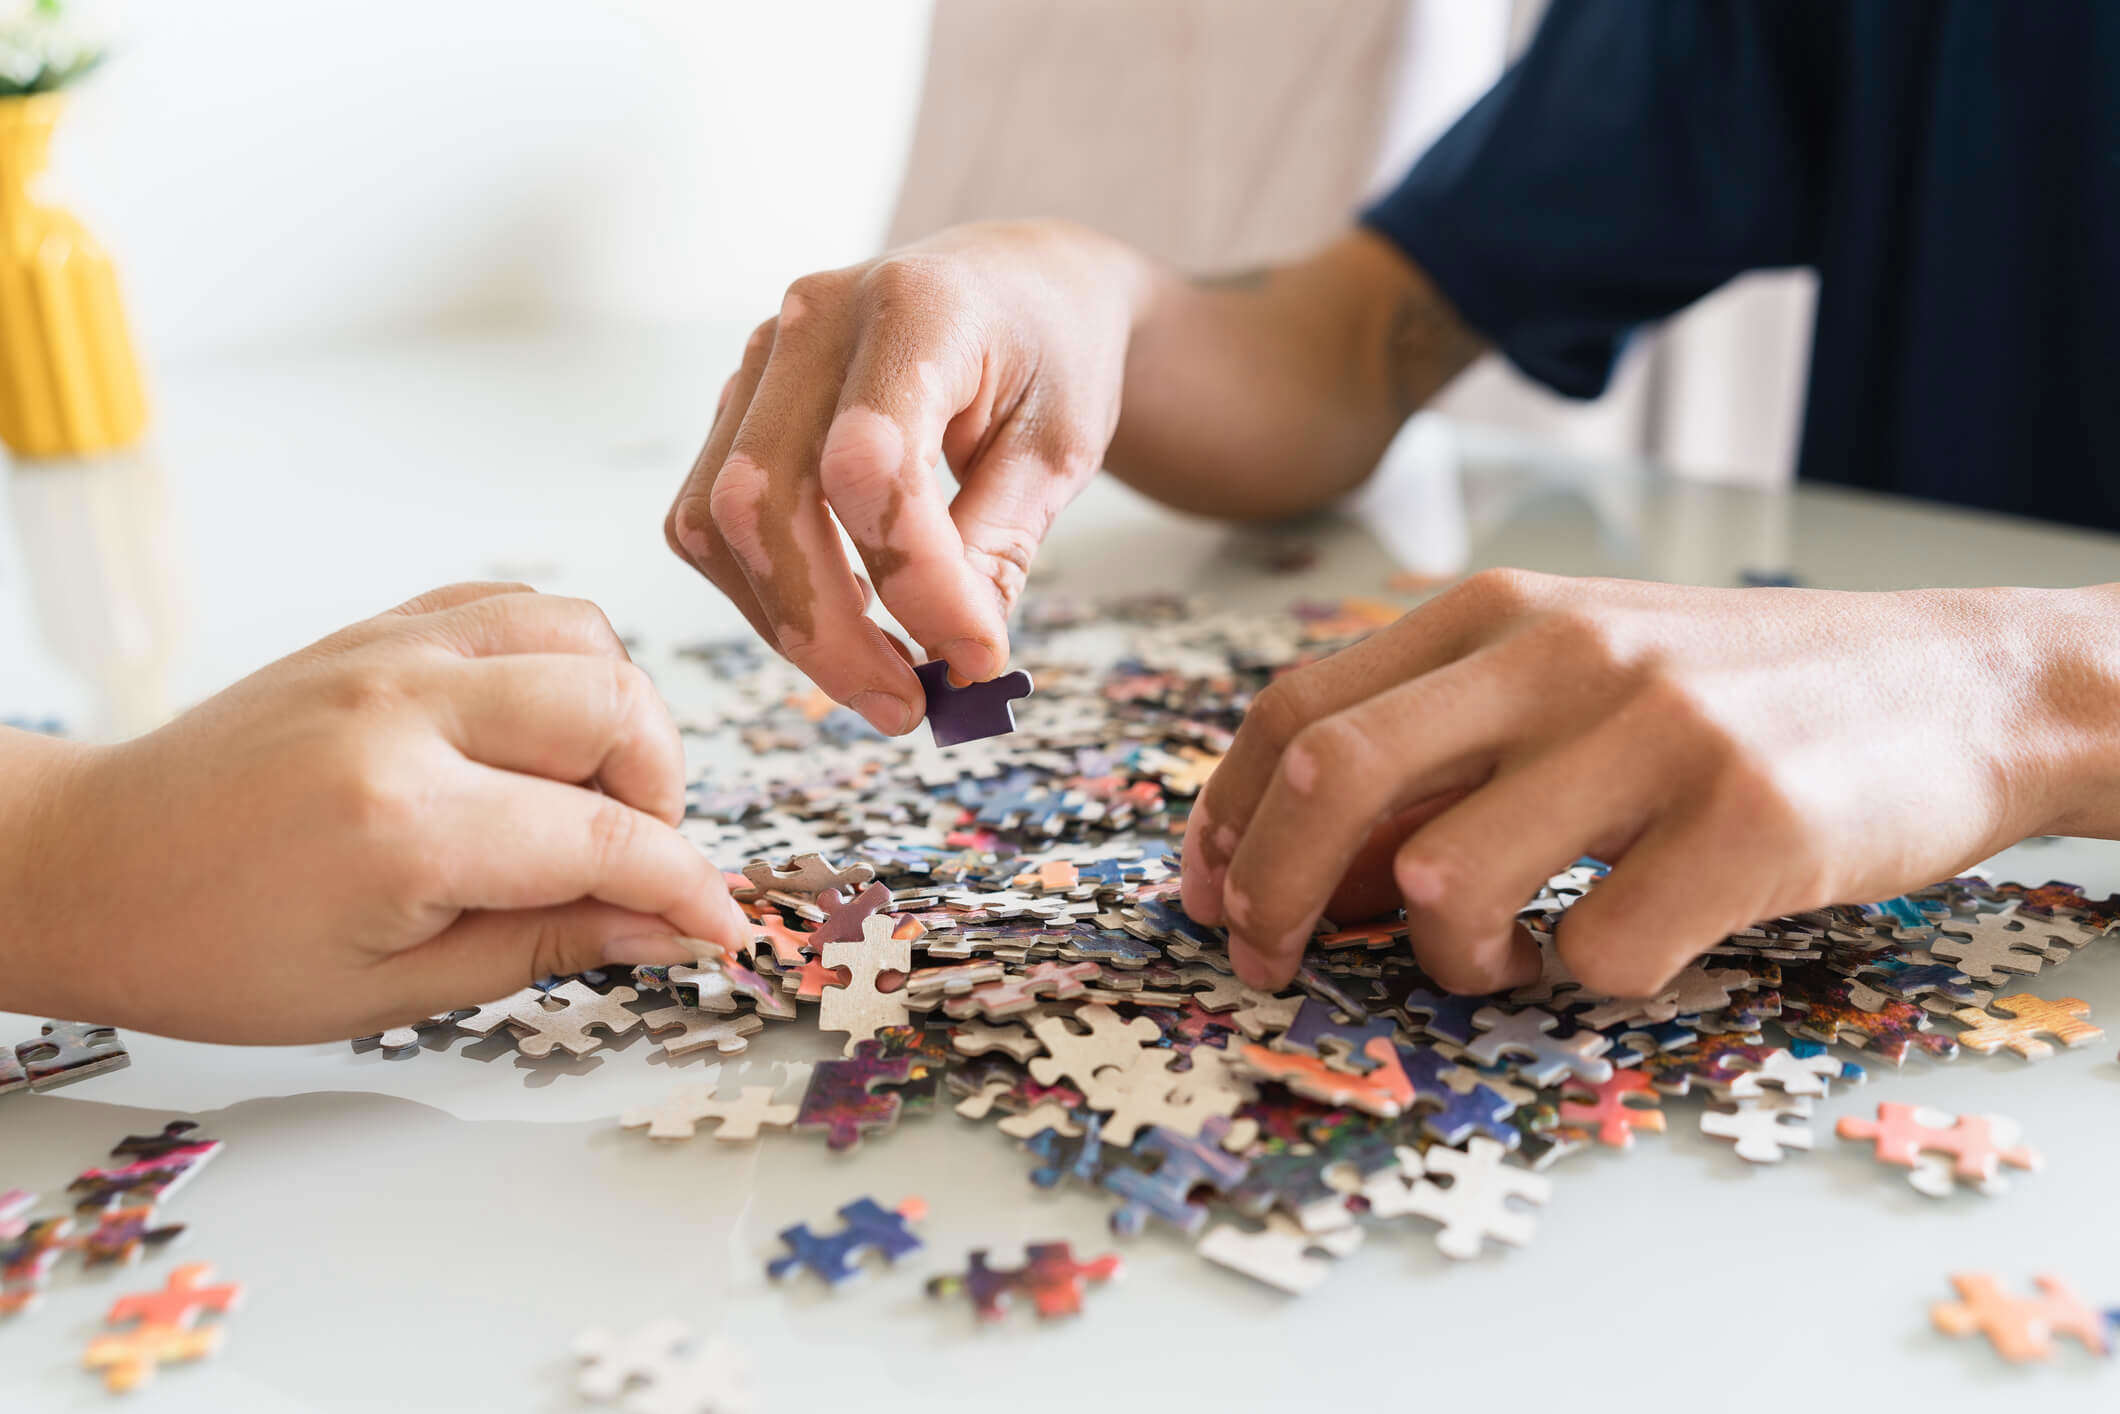 A couple working on a jigsaw puzzle